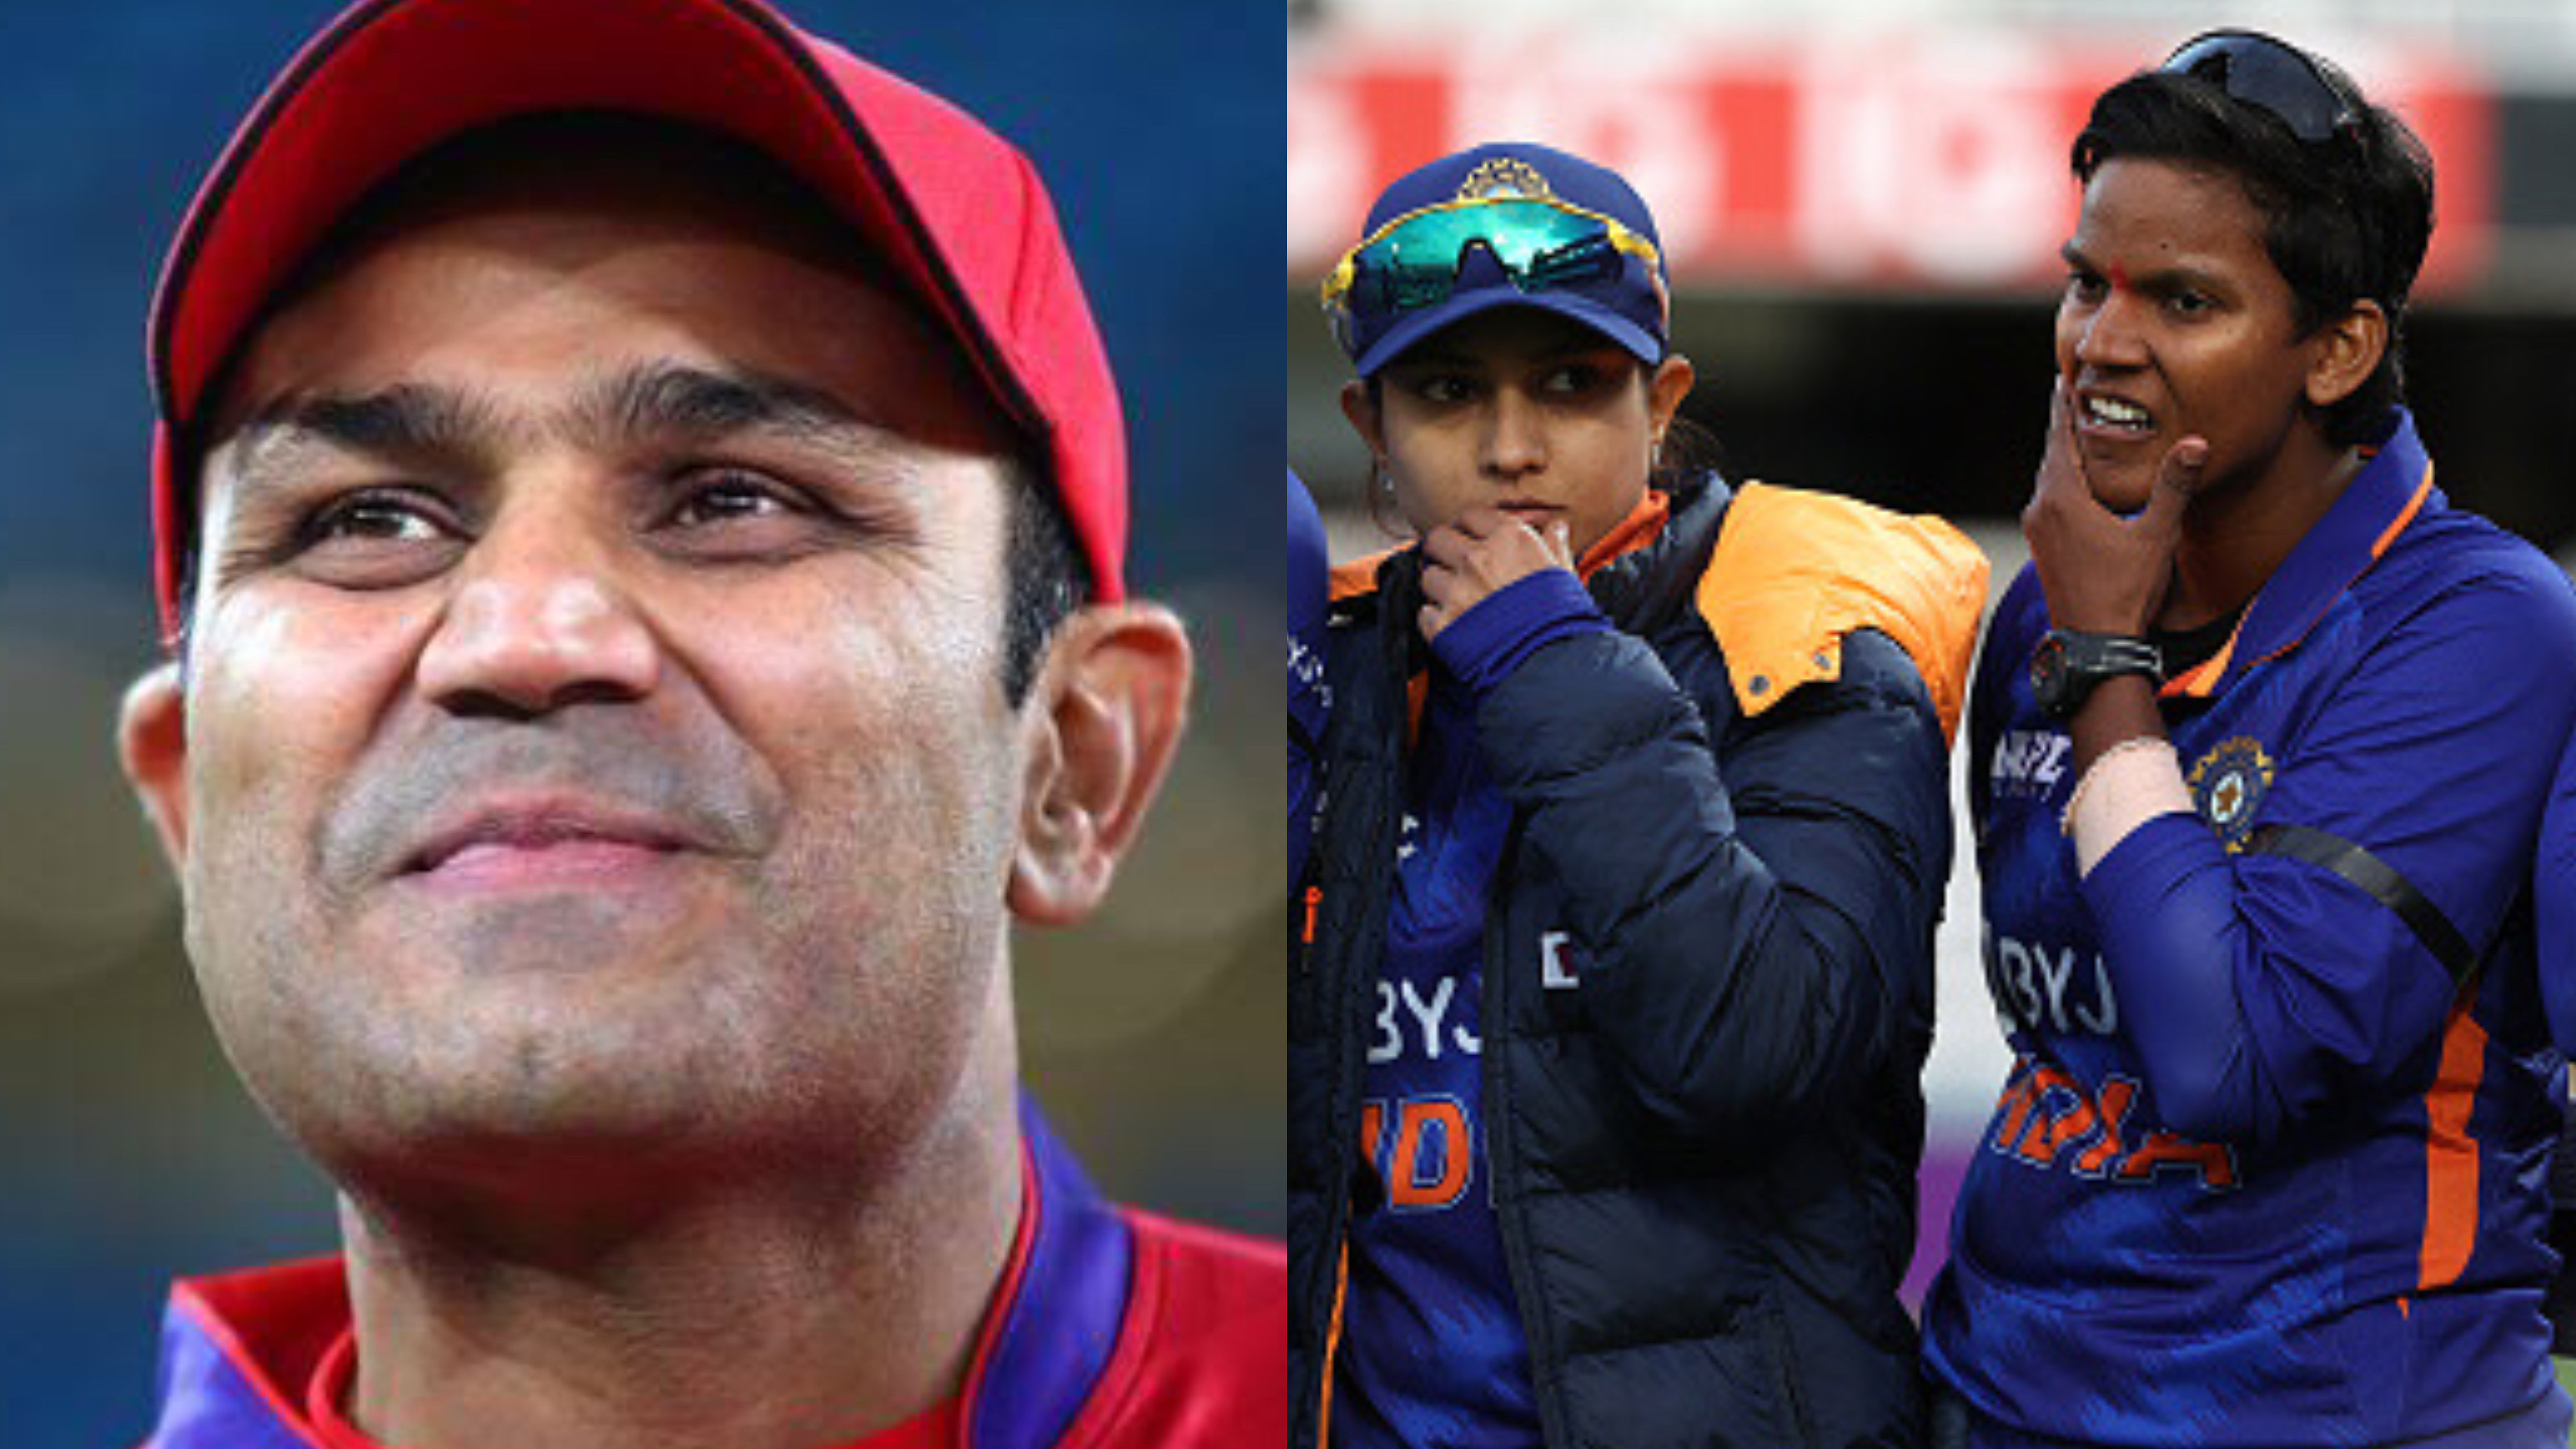 ENGW v INDW 2022: 'Funny to see England guys being poor losers'- Sehwag takes a jibe after Deepti's run out